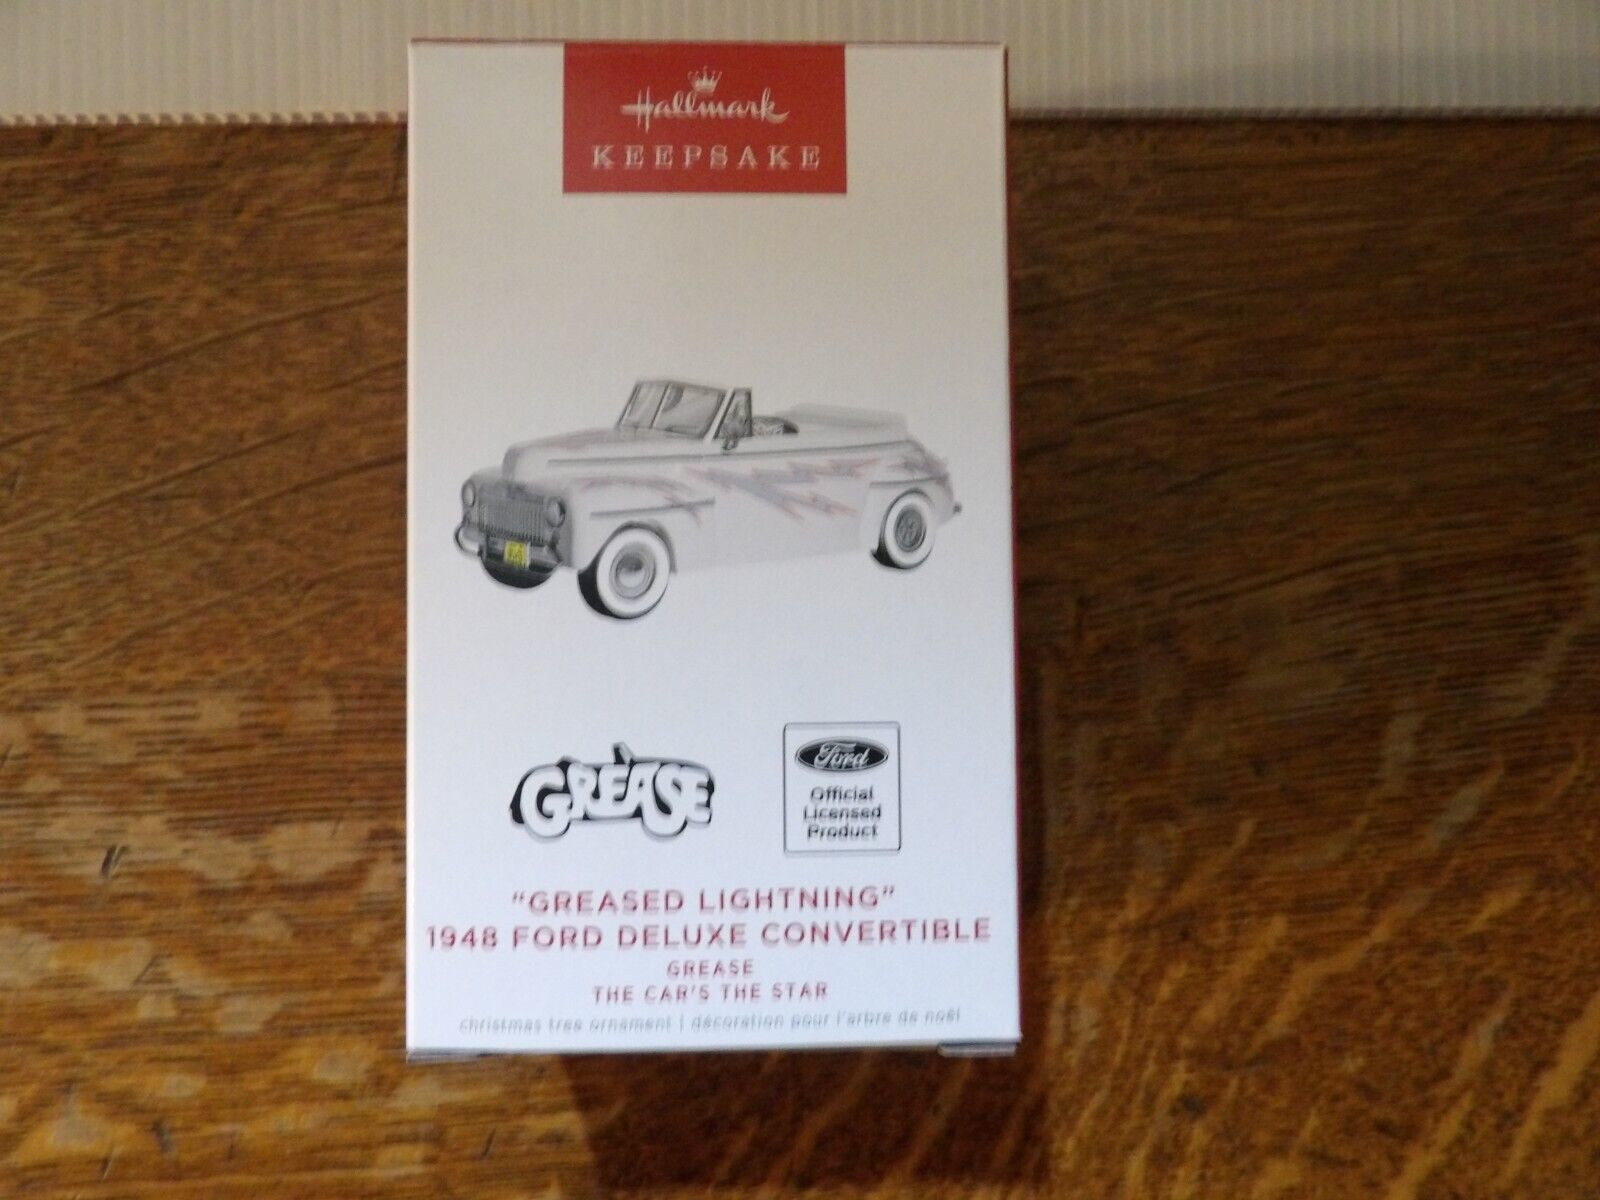 New 2022 Hallmark GREASED LIGHTNING 1948 Ford DeLuxe Convertable Ornament NIB - £9.34 GBP